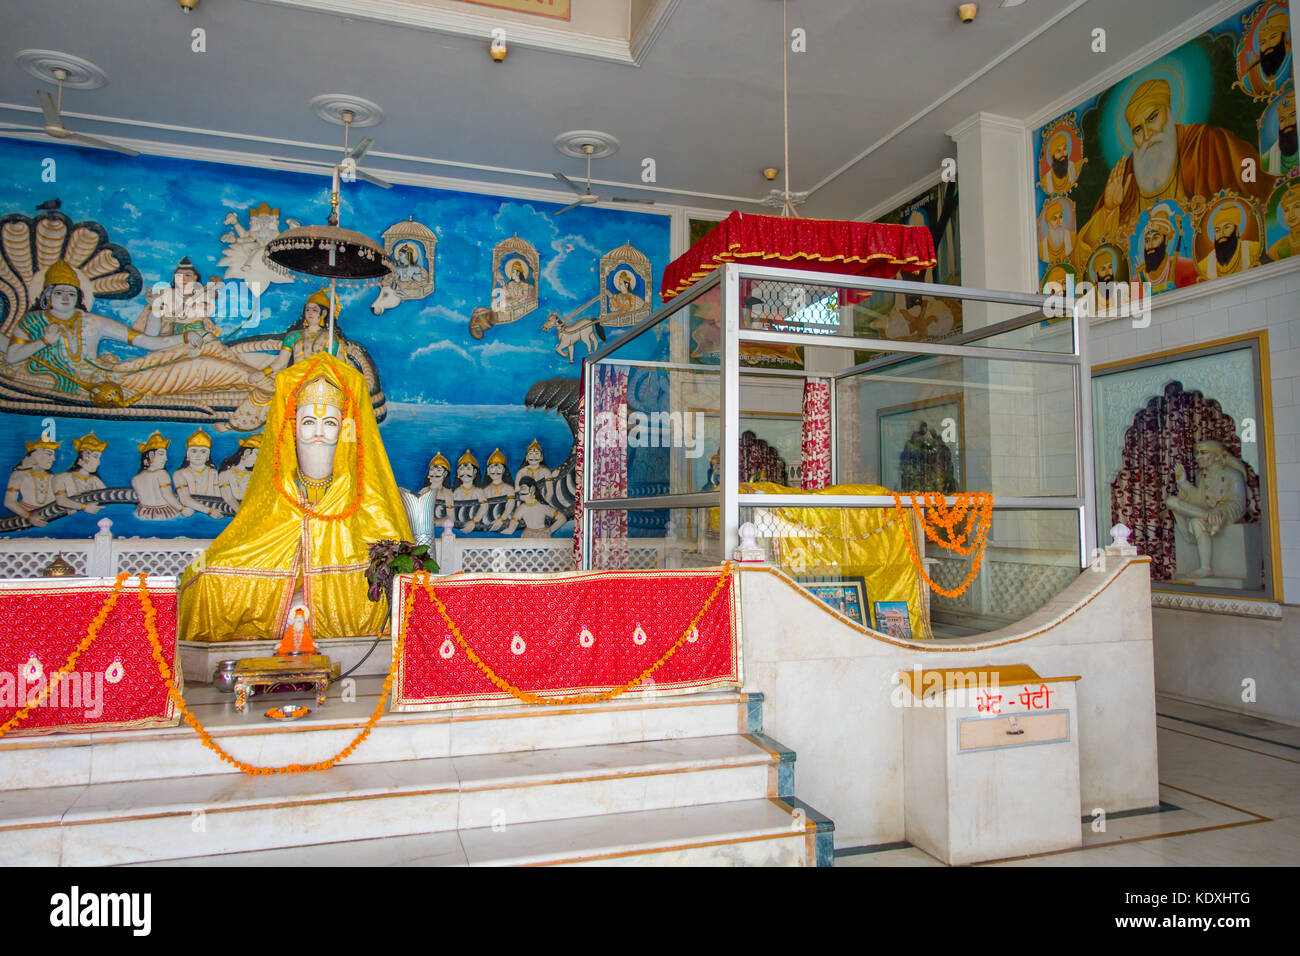 JAIPUR, INDIA - SEPTEMBER 19, 2017: Indoor view of a temple Goddess Kali Ma and God Bhairav Murti in Jaipur local Temple. Statues of Hindu Gods and Goddess in Rajasthan Stock Photo